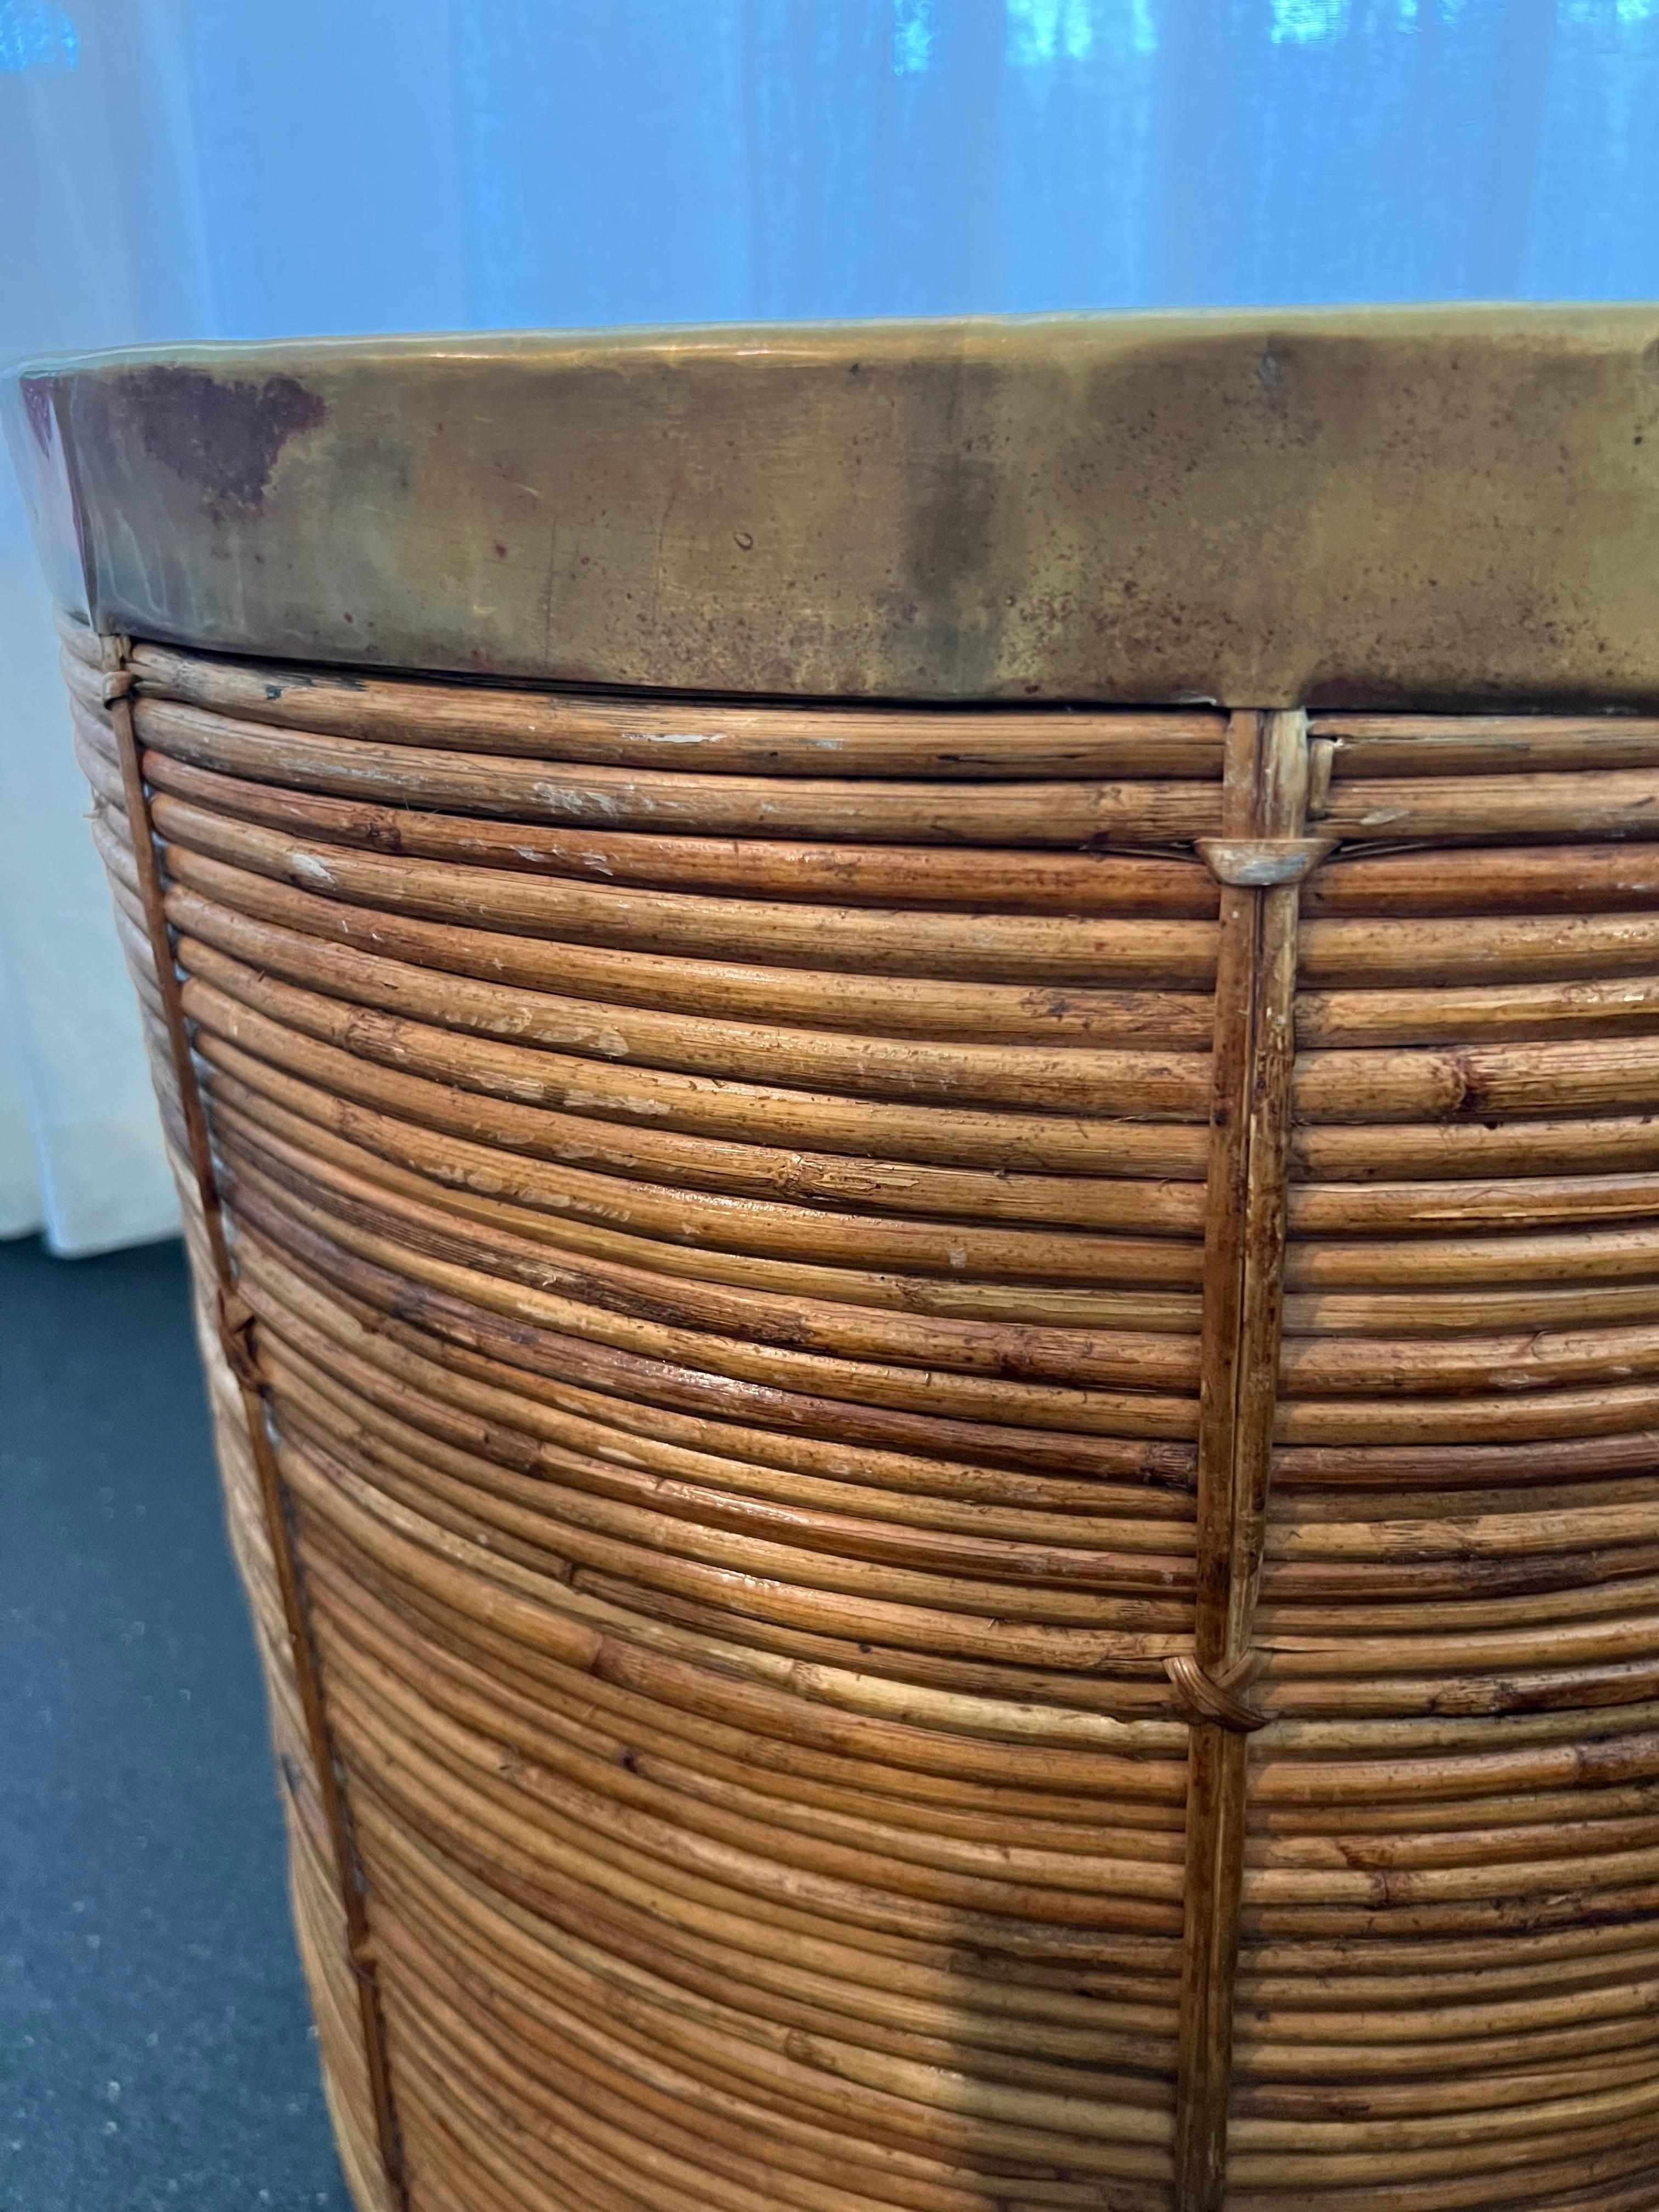 Monumental Gabriella Crespi Style Pencil Reed Basket In Good Condition For Sale In West Palm Beach, FL